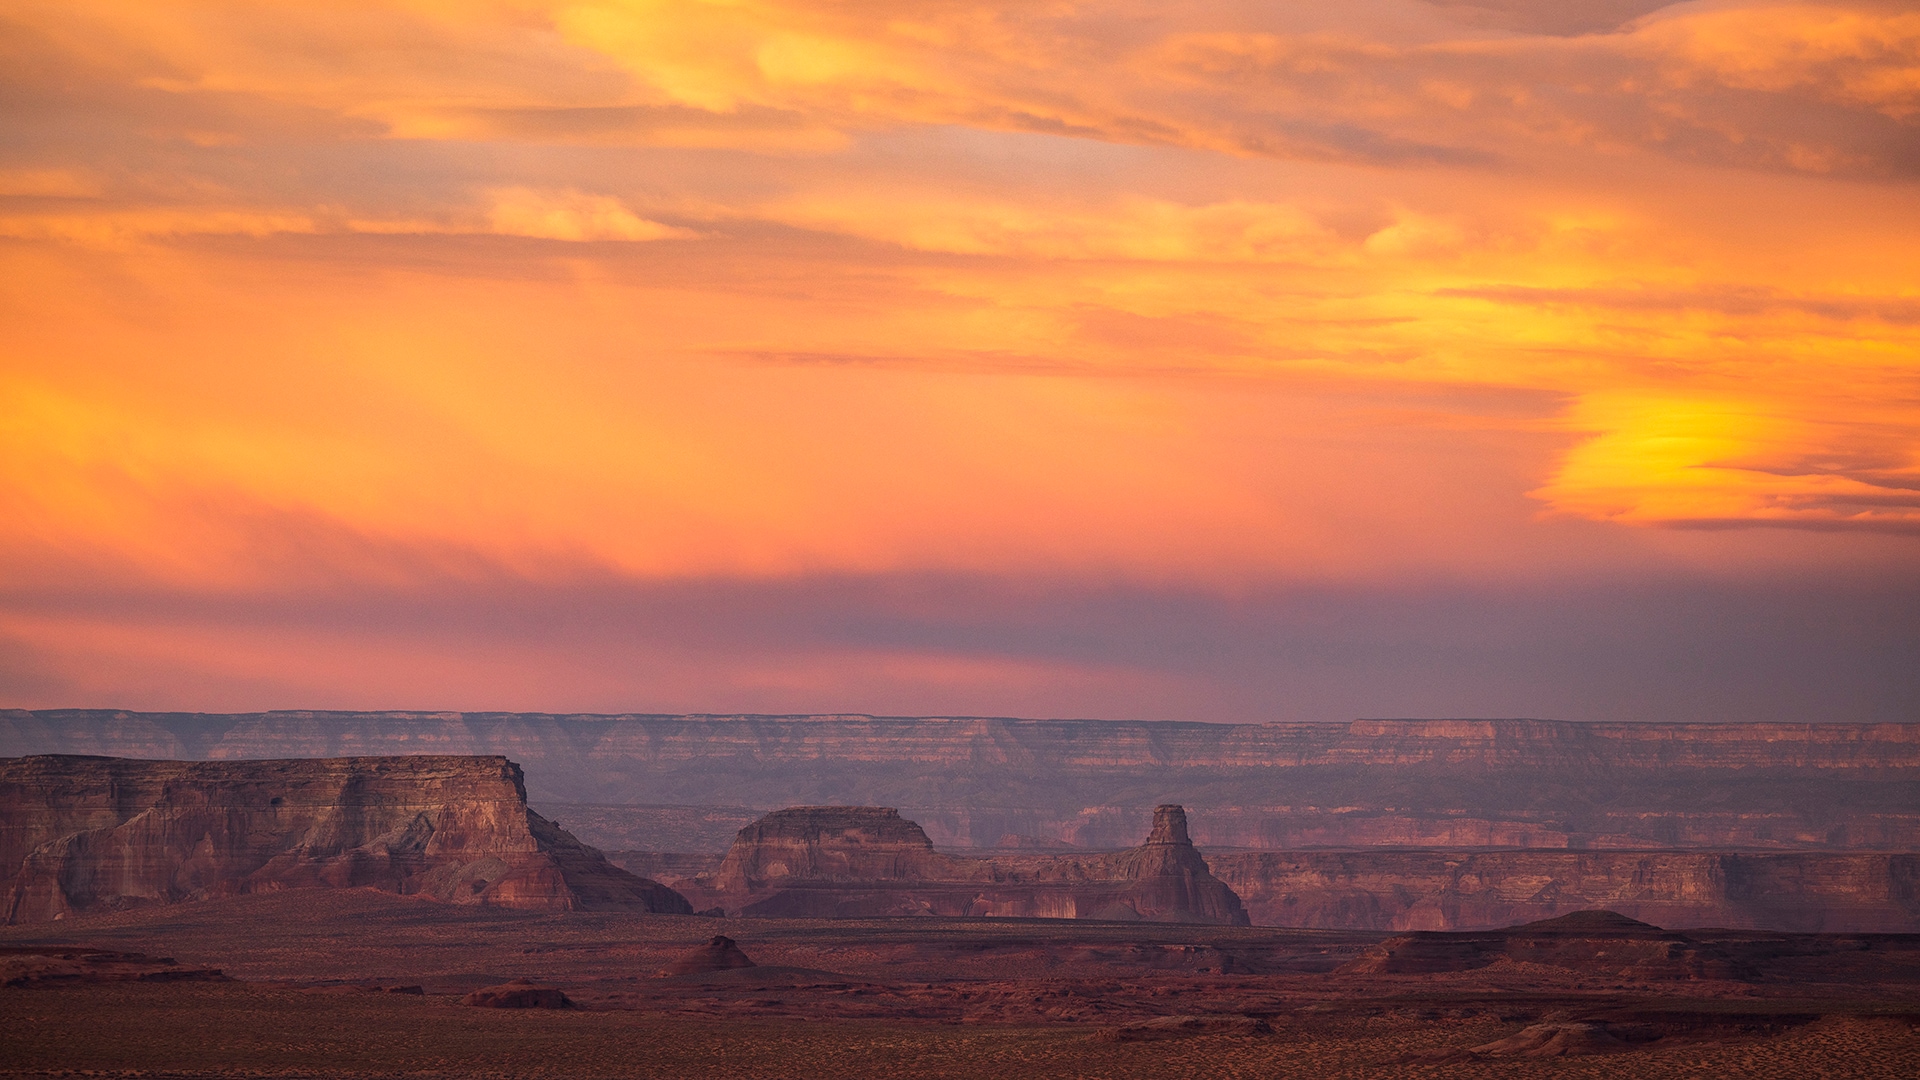 The sunset lights up the sky over Lake Powell as seen from Grandview Overlook in Page, Arizona.